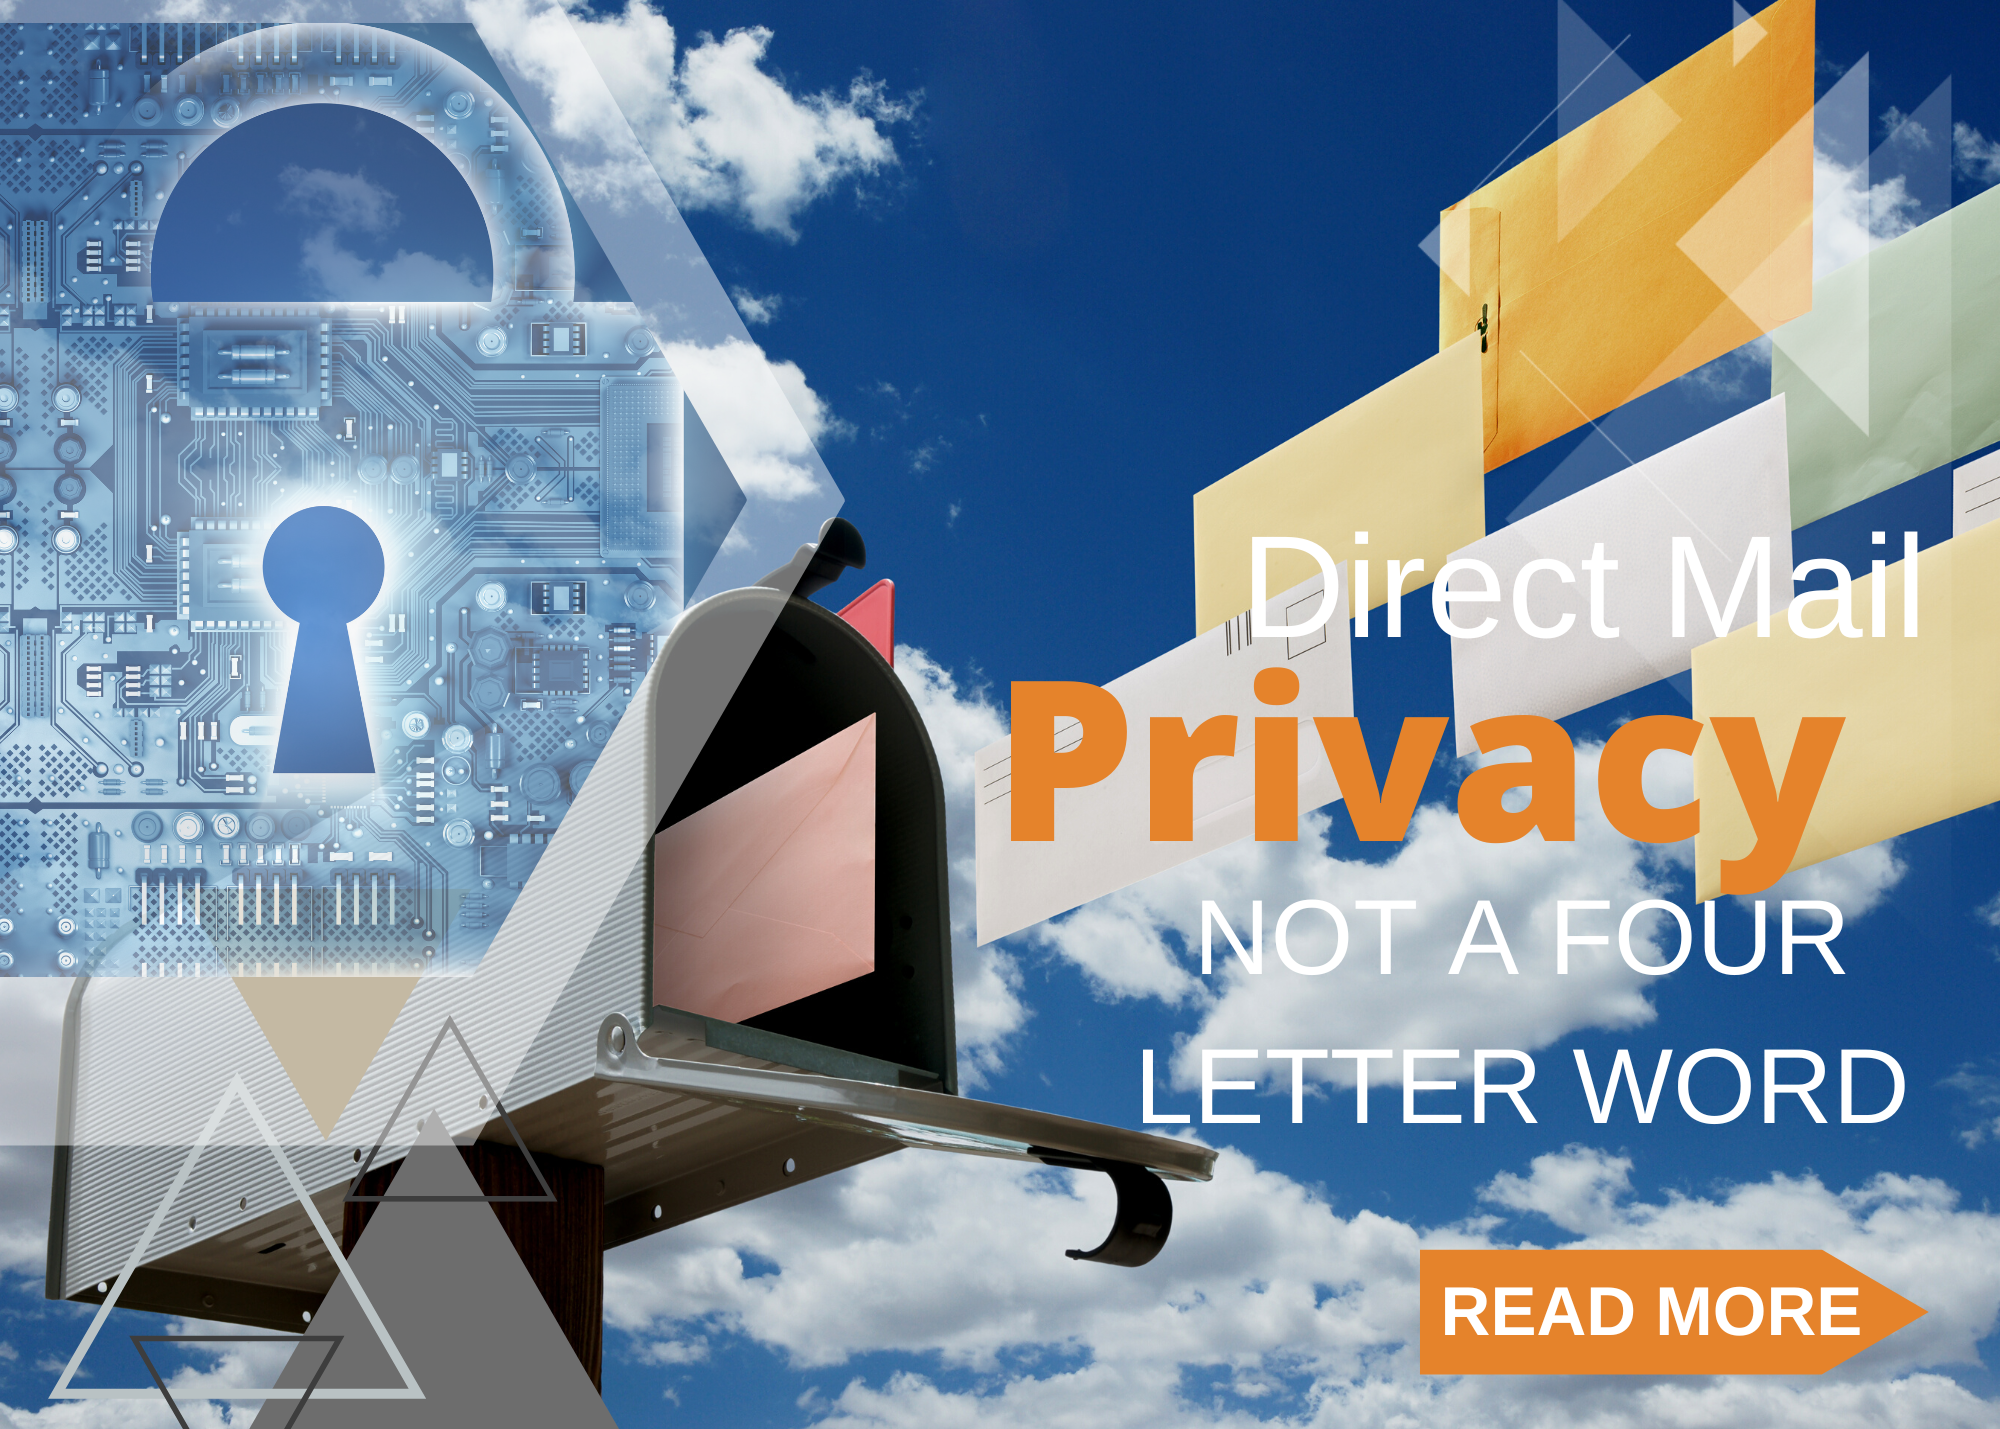 Direct Mail: Privacy, Not a Four Letter Word